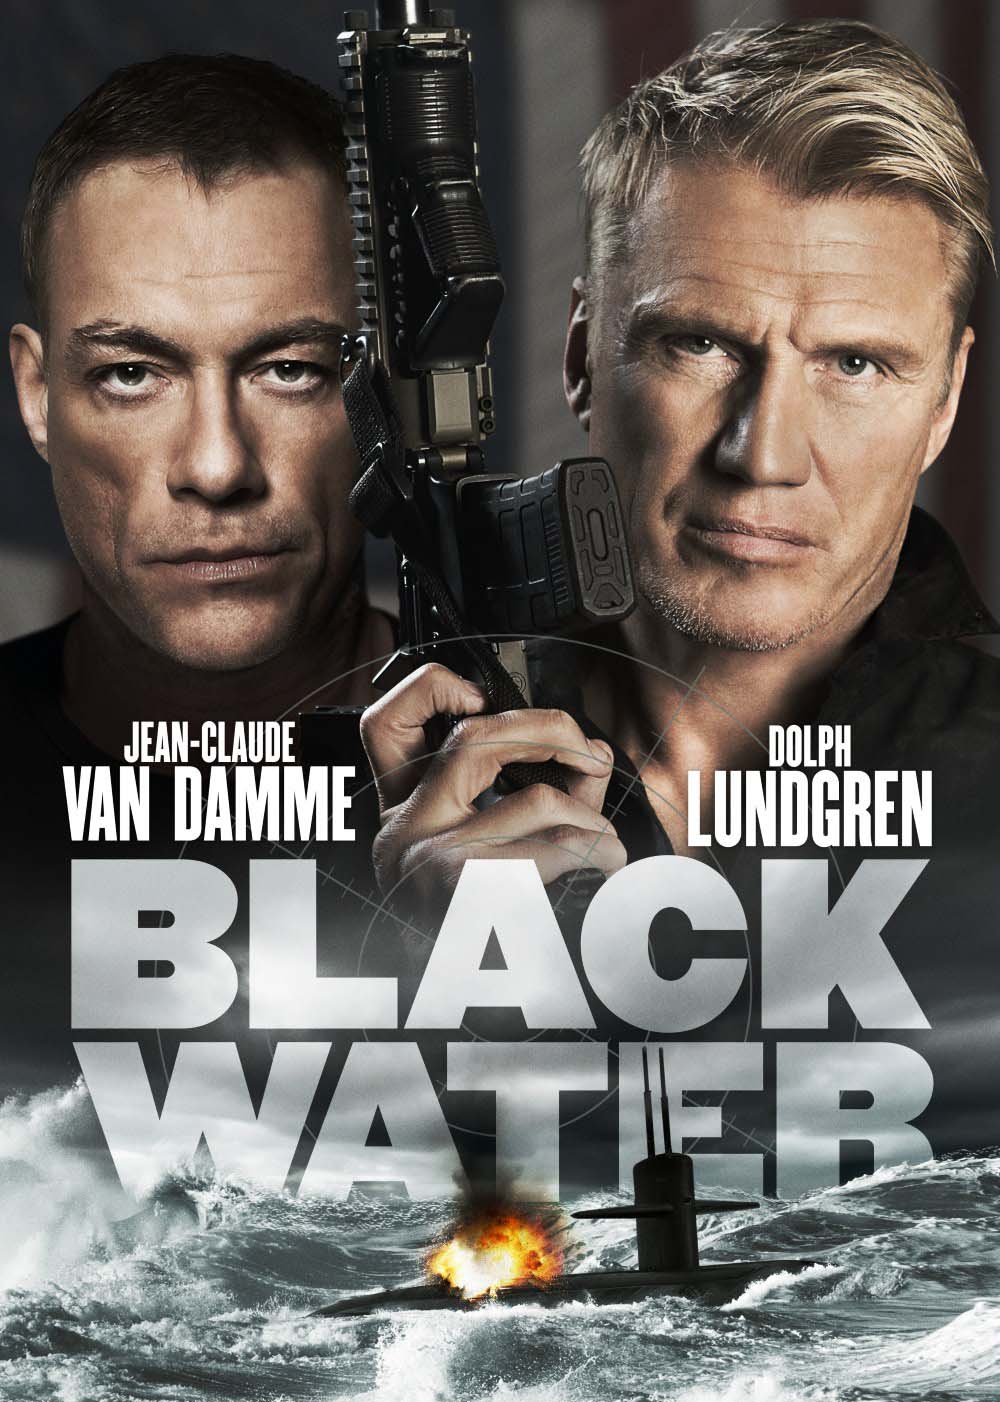 Black Water (2018) Official Full Movie Free Online